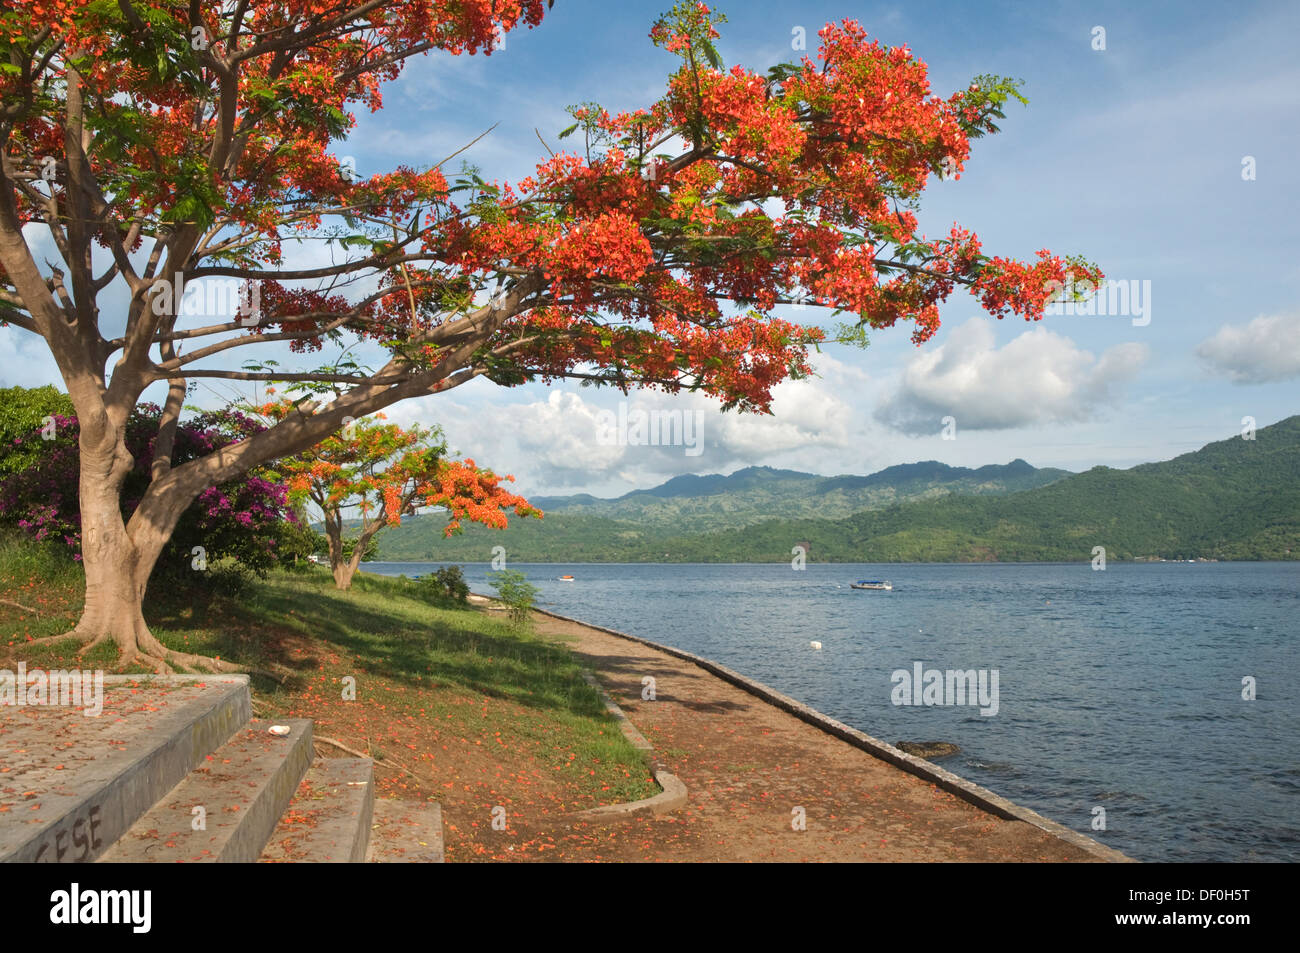 INDONESIA, Flores, Larantuka, view over the bay with Illawarra Flame Tree, Brachychiton acerifolius, in foreground Stock Photo